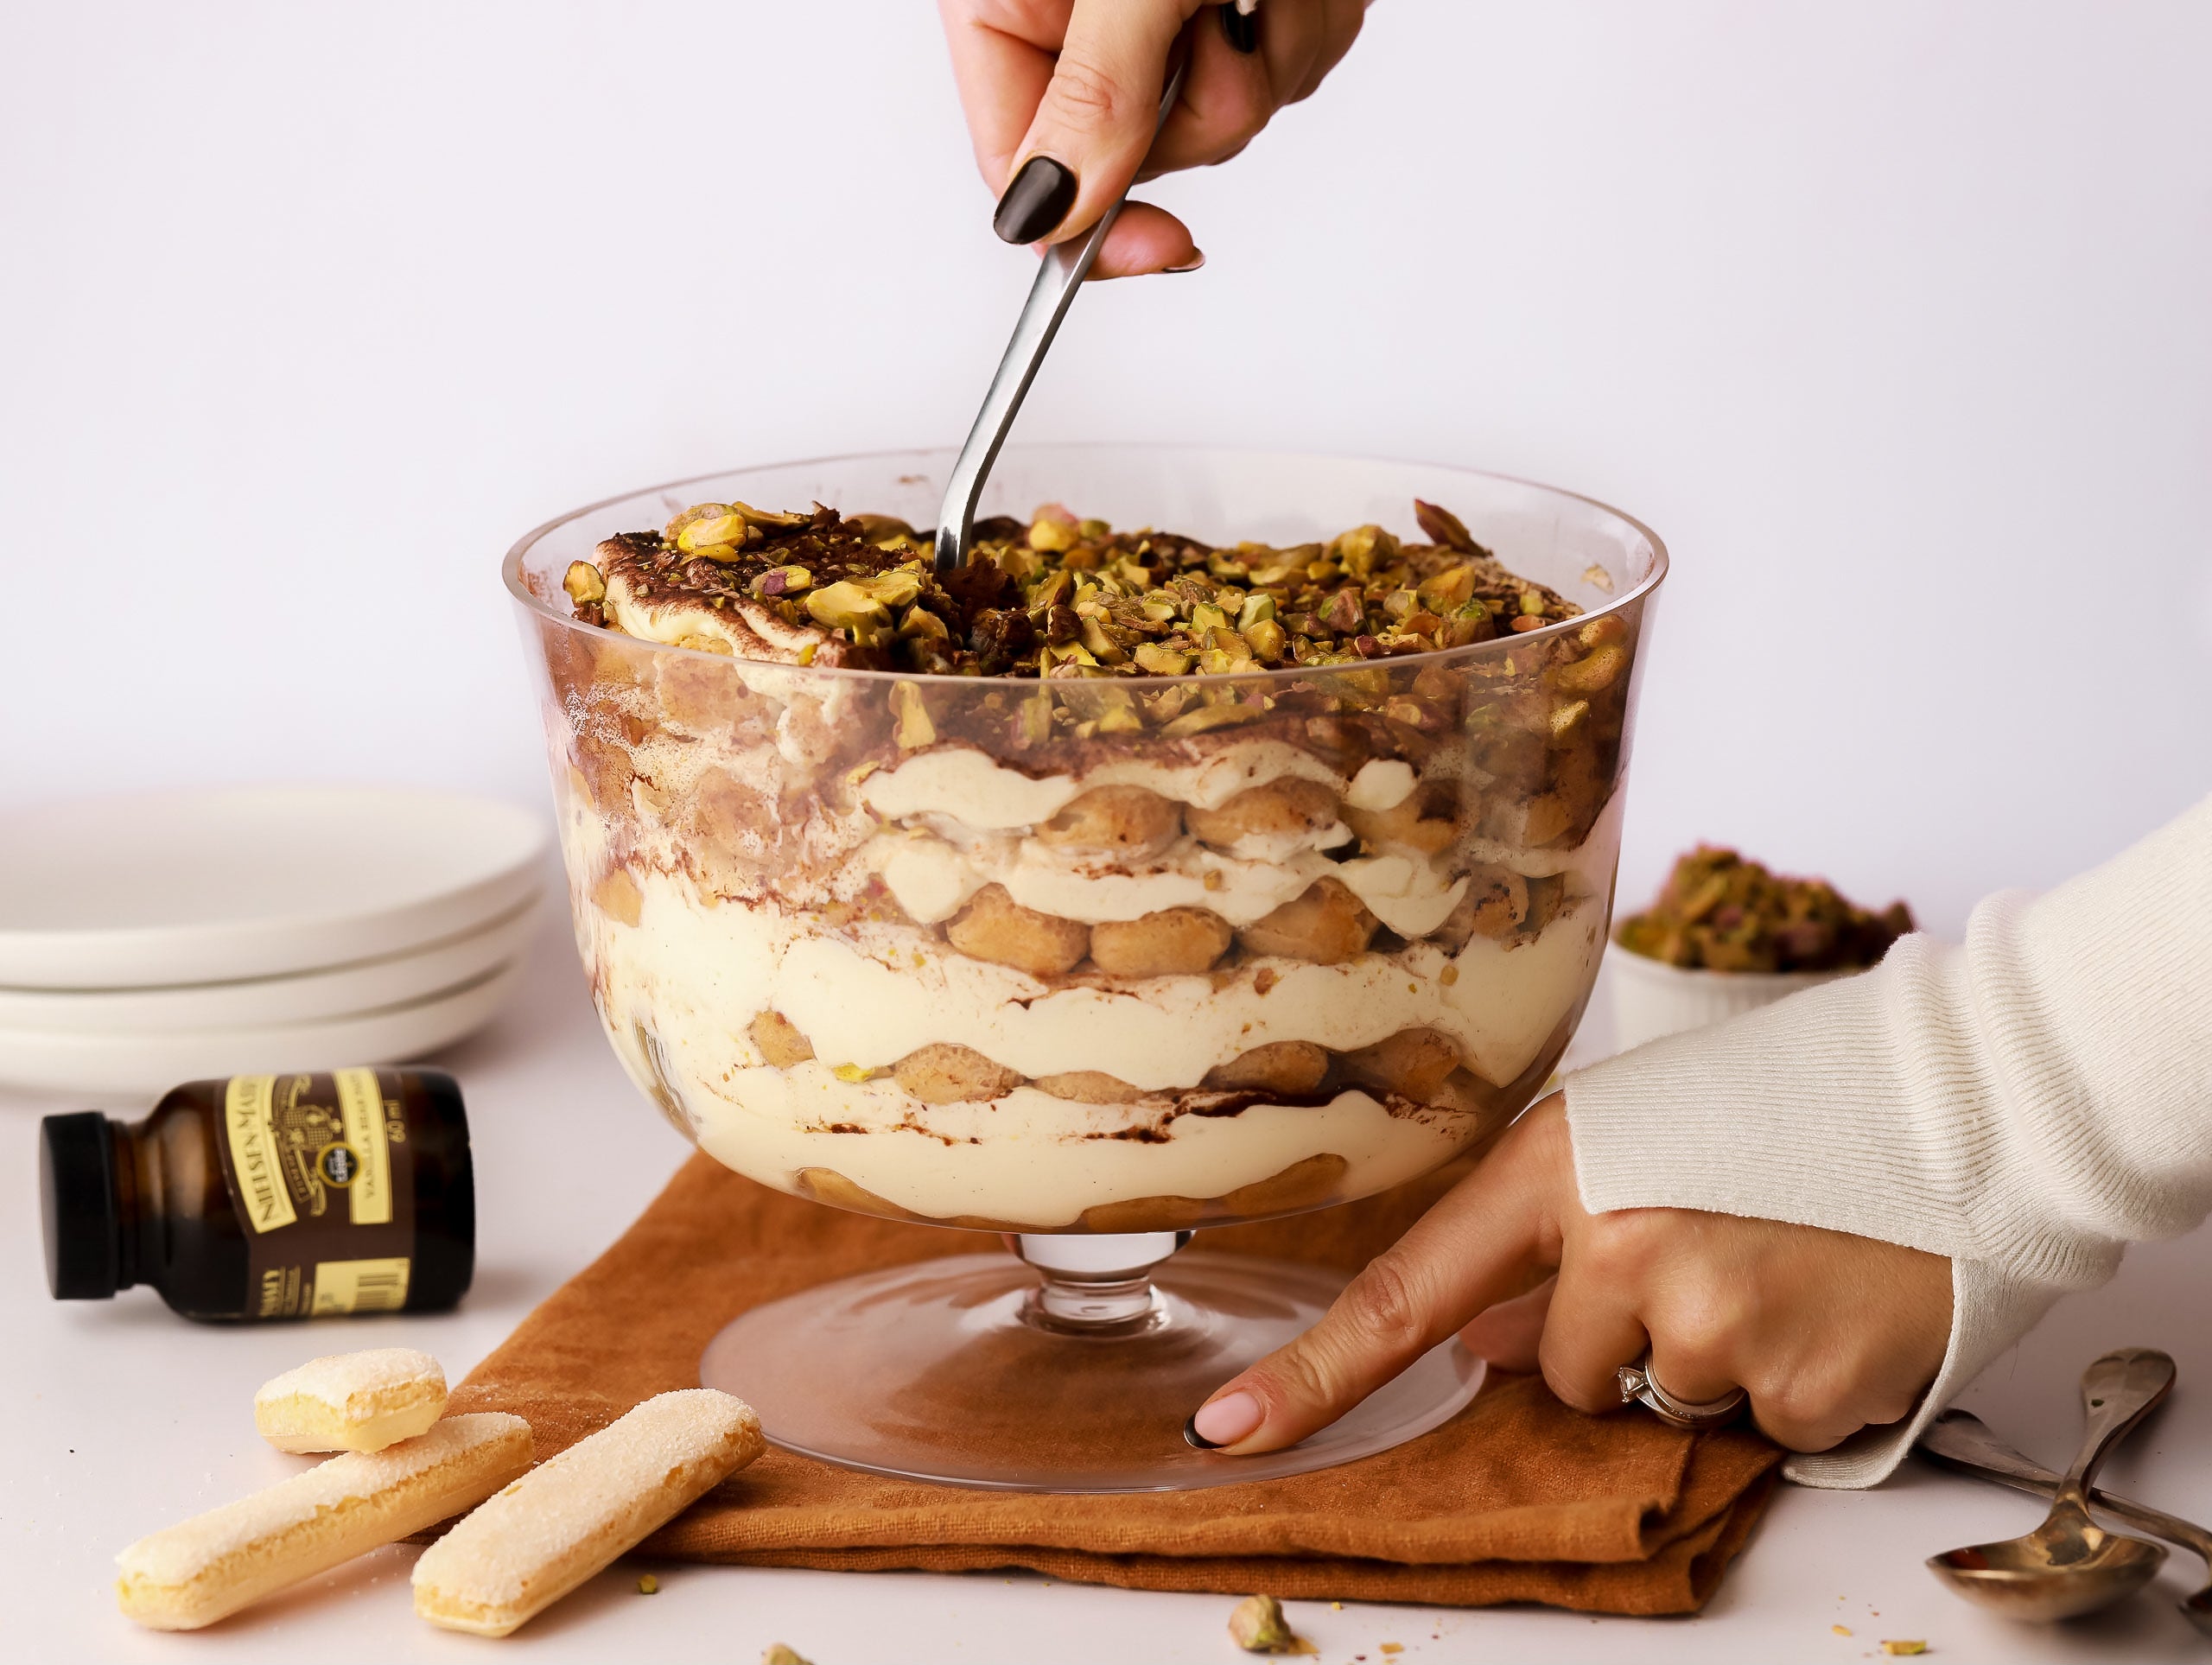 Hand spooning out a portion of tiramisu from a large glass bowl